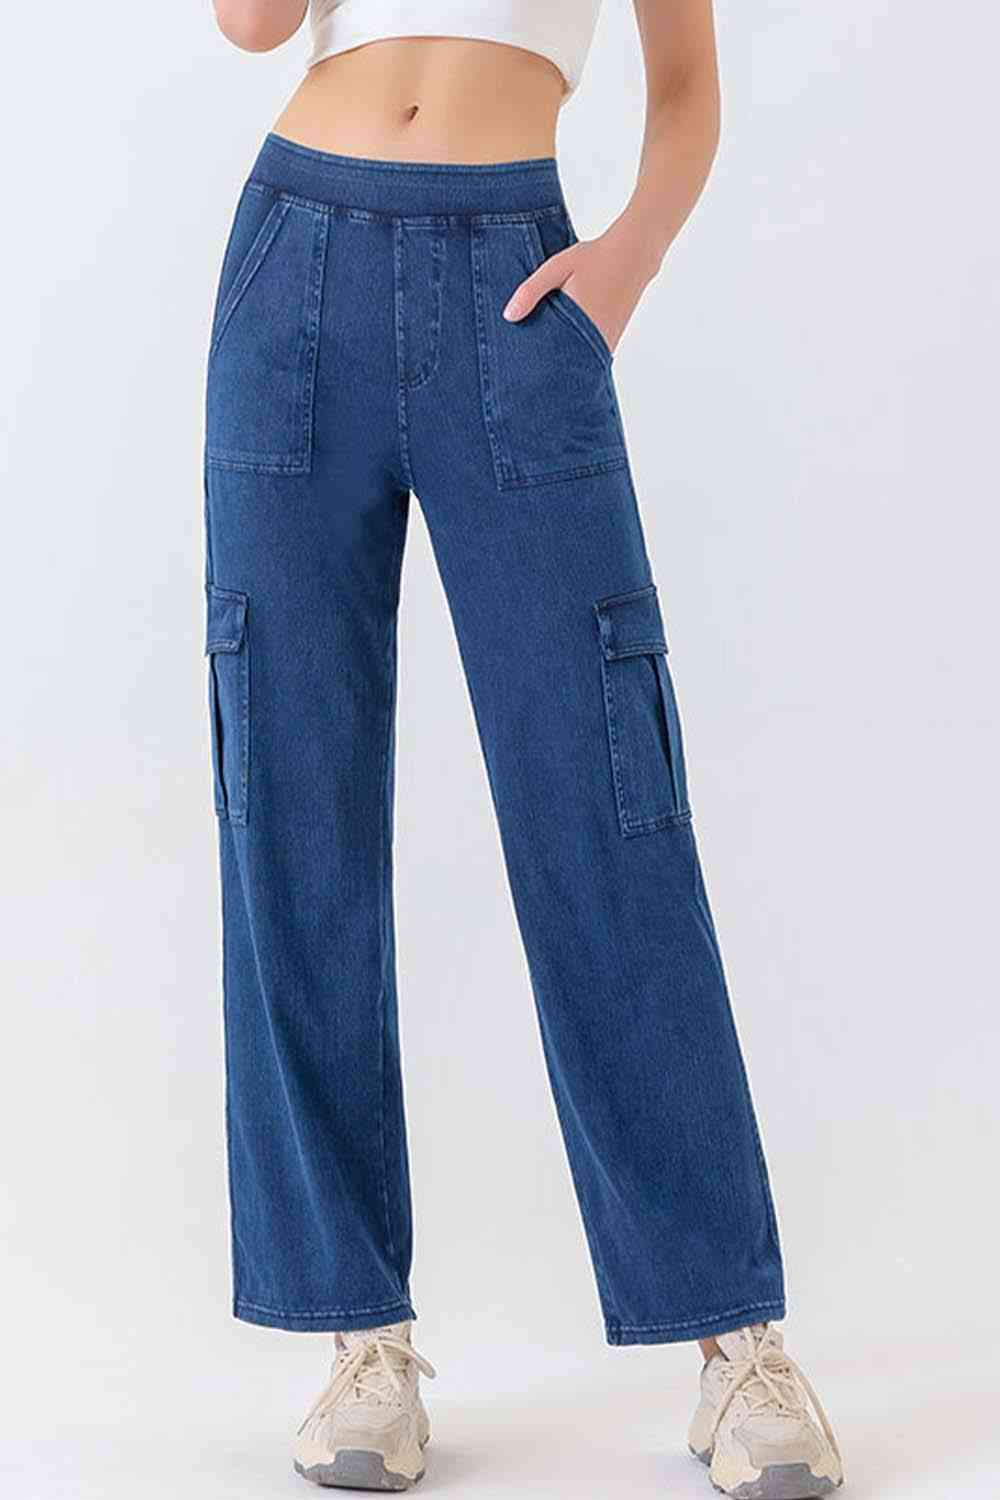 4 Colors - Buttoned Pocketed Long Jeans